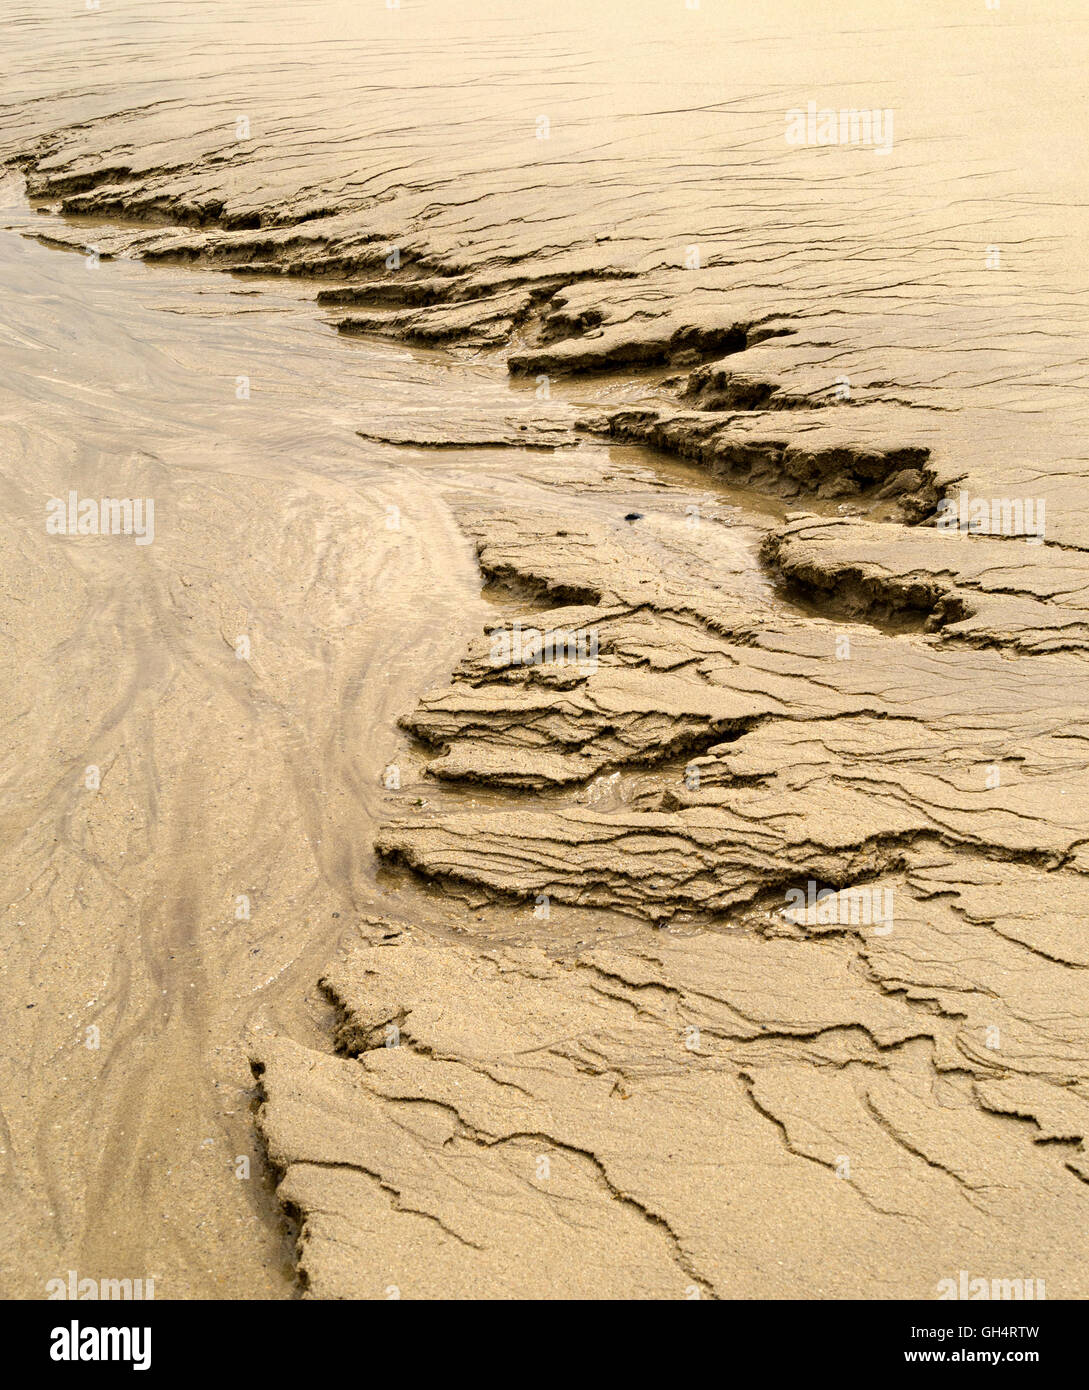 Patterns in yellow beach sand caused by water erosion Stock Photo